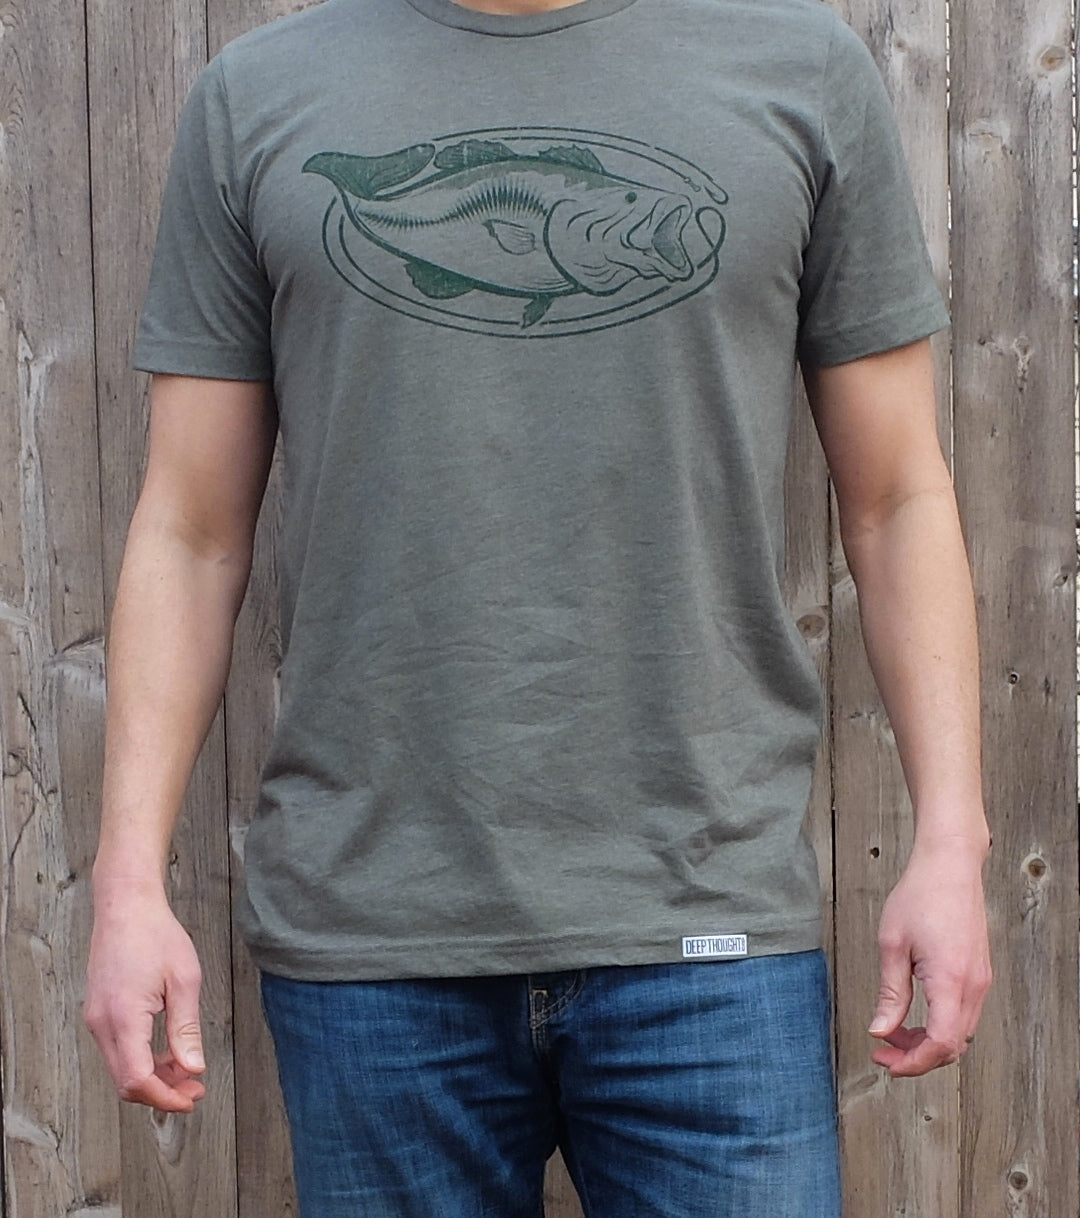 man wearing heather army green t-shirt with dark green oval-shaped largemouth bass fishing graphic